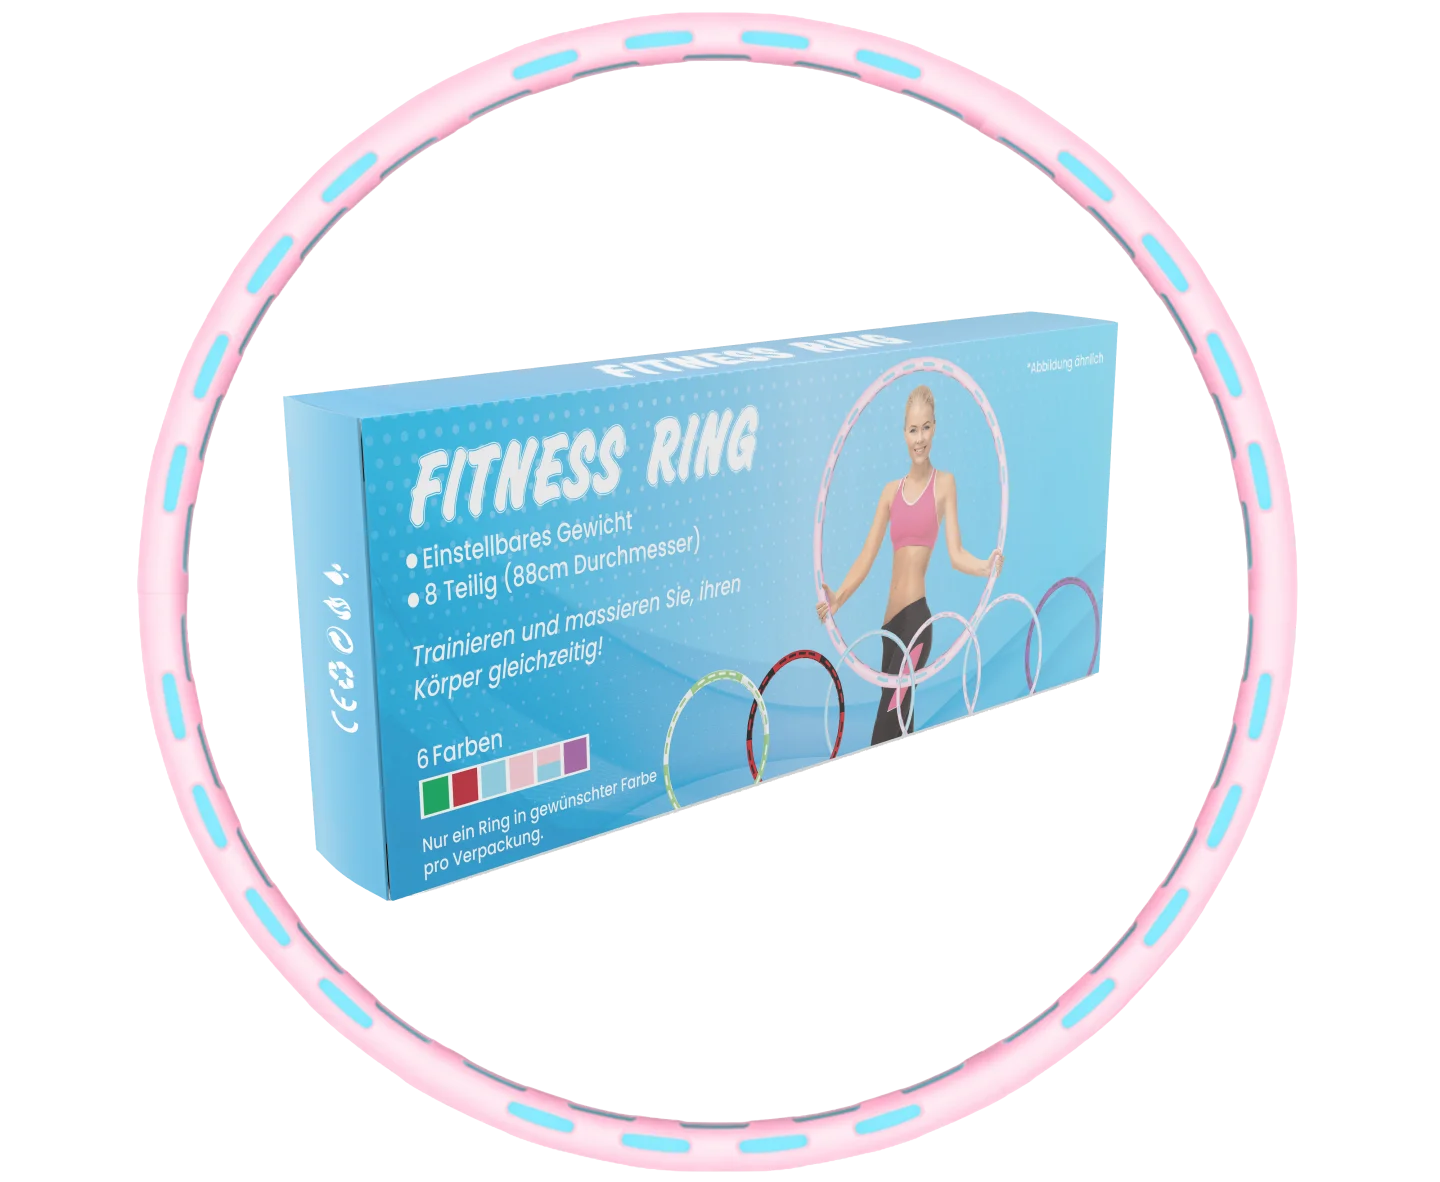 Fitness ring